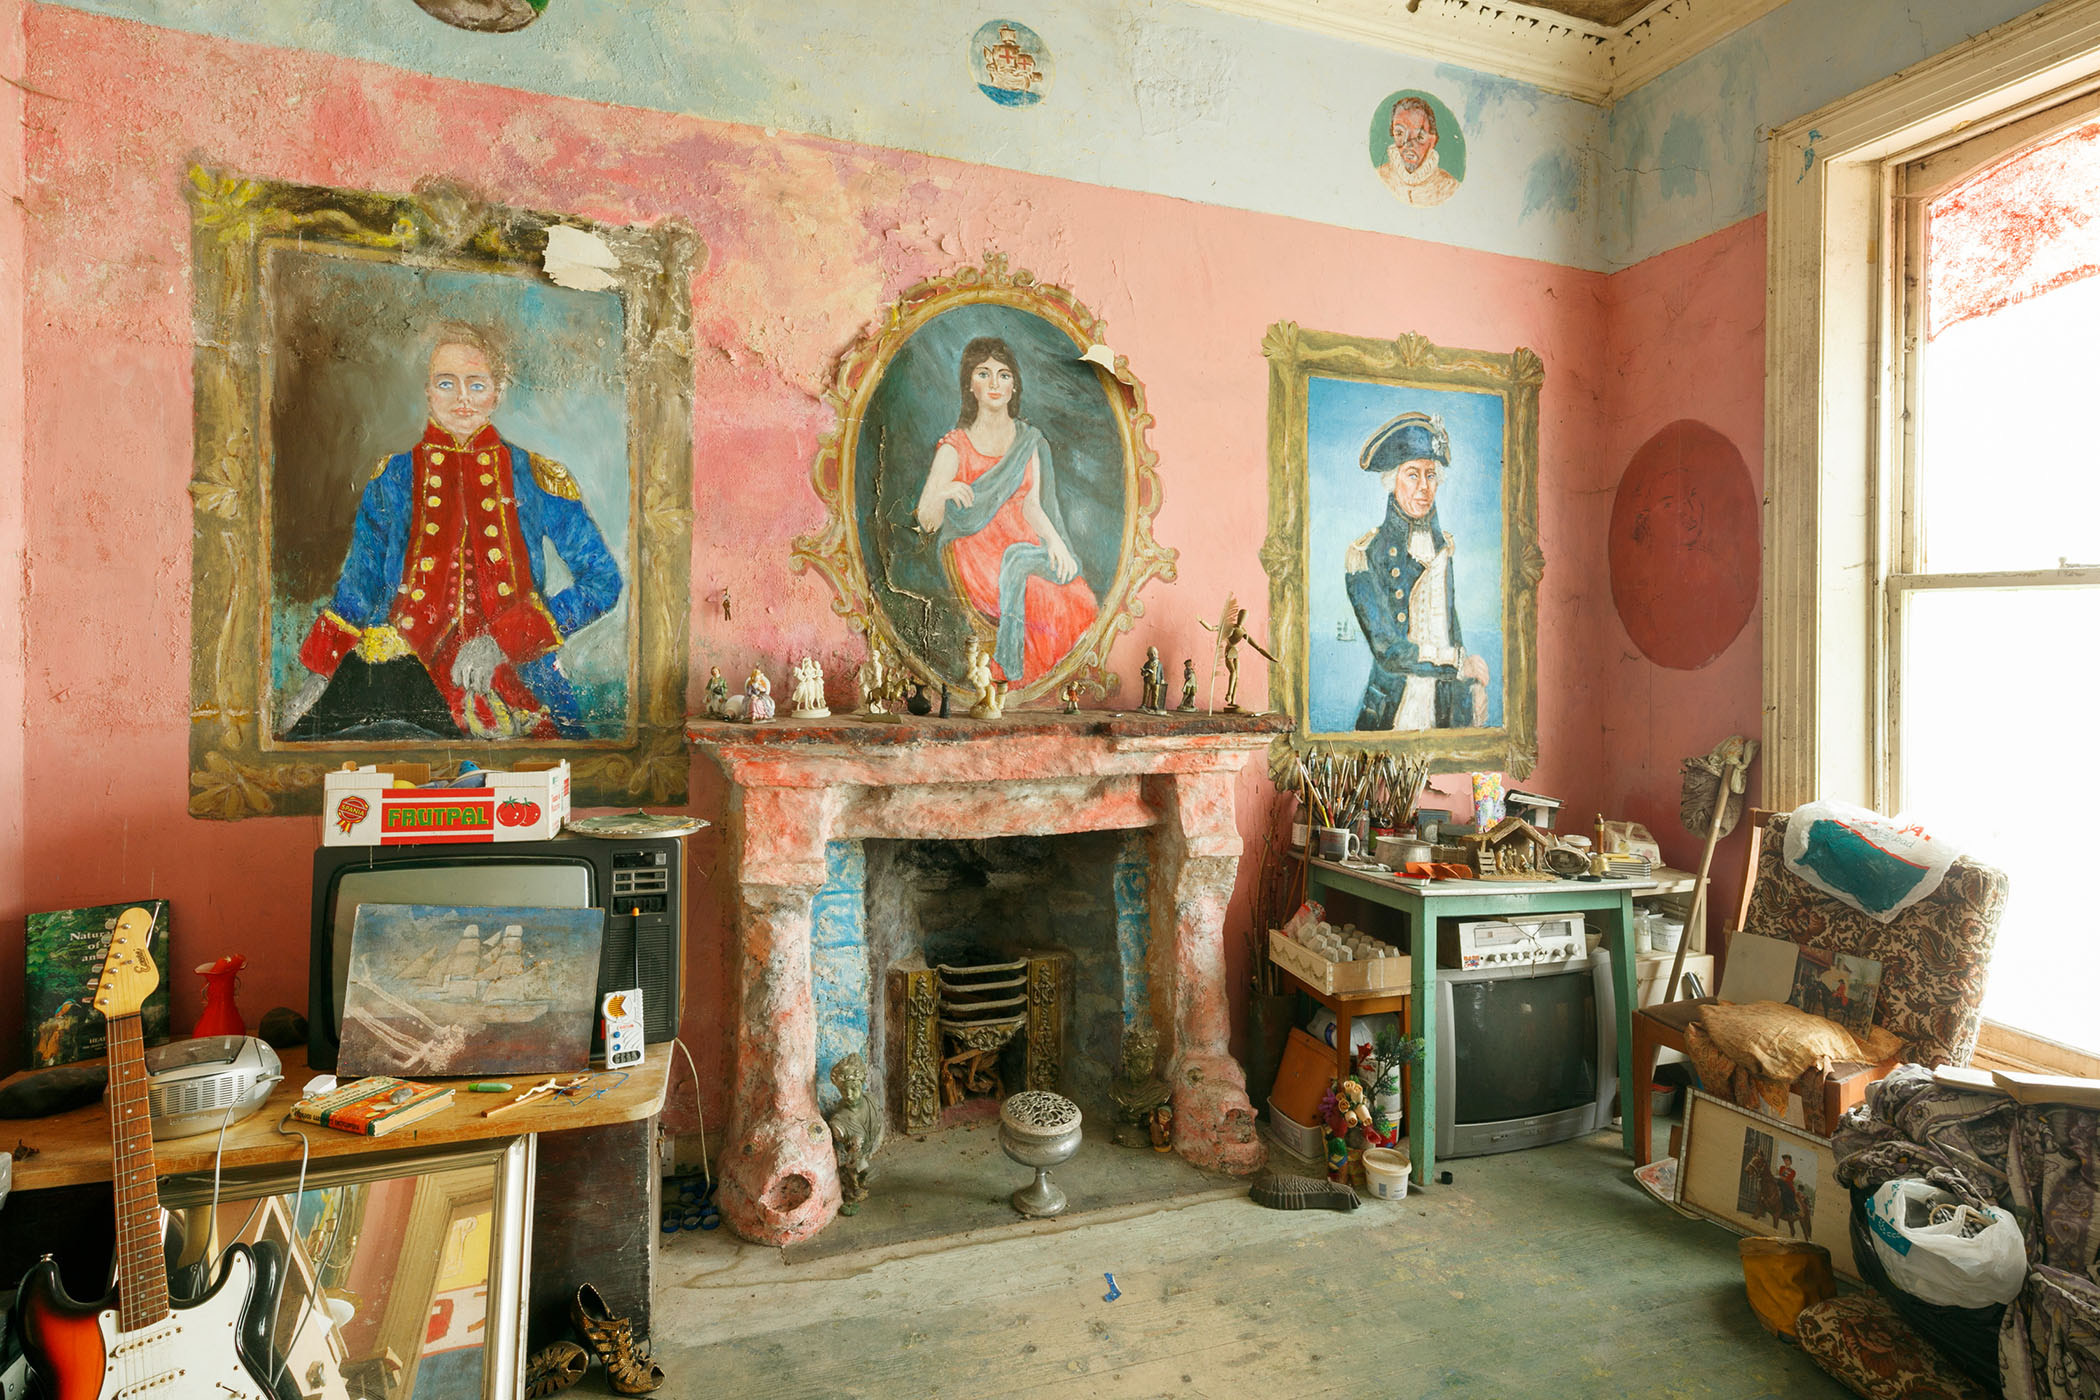 A photograph of a room containing an old, disused fireplace and 3 figures within decorative frames painted on the wall